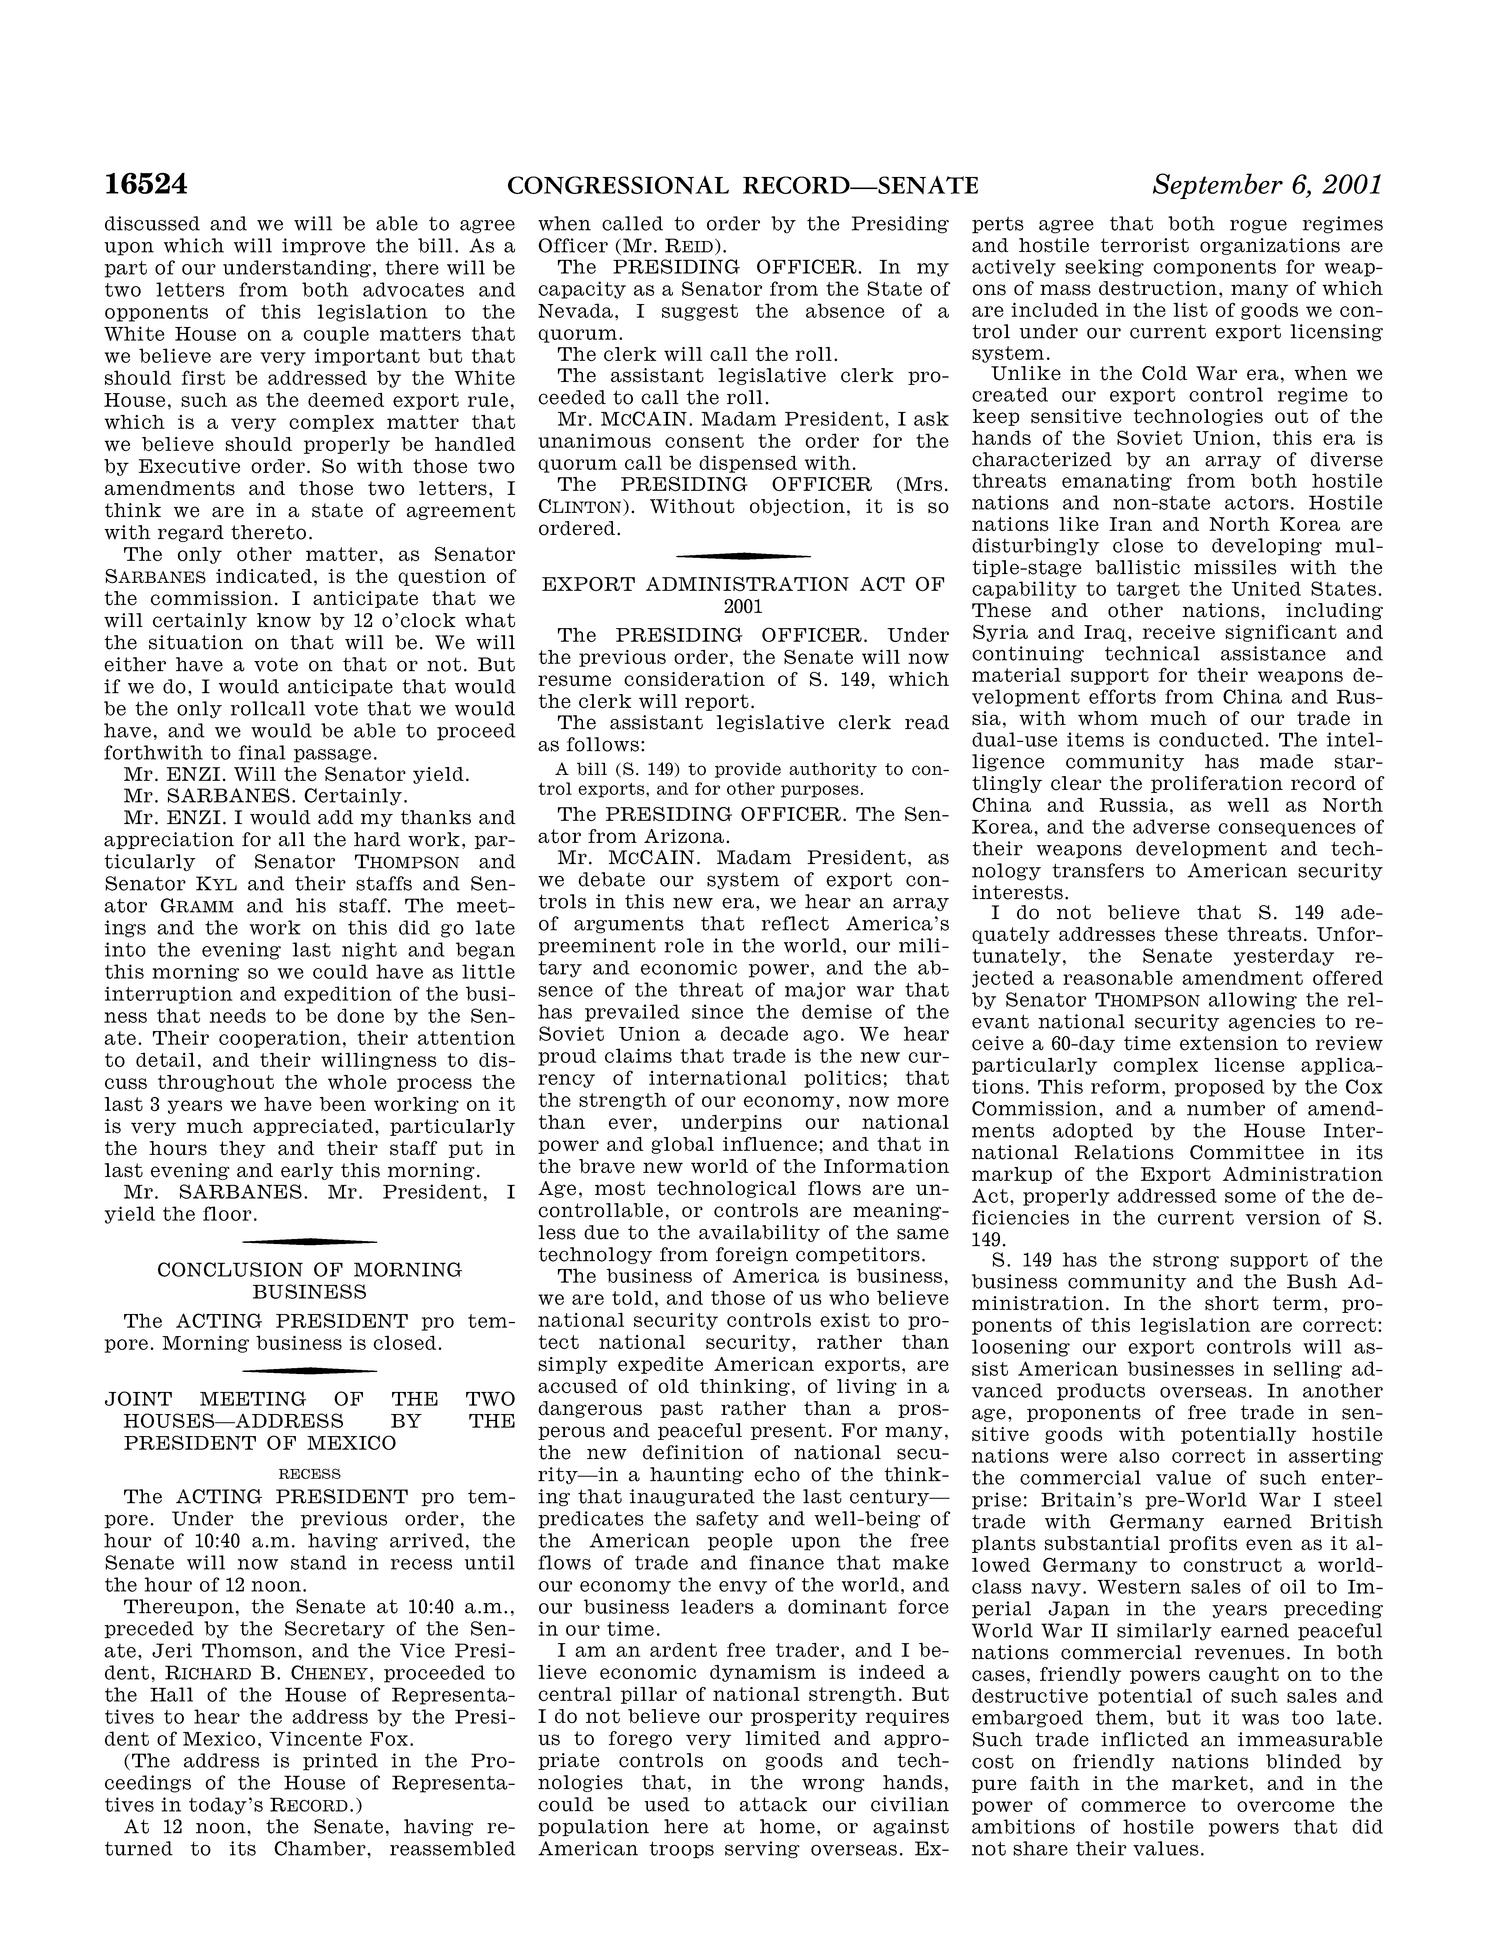 Congressional Record: Proceedings and Debates of the 107th Congress, First Session, Volume 147, Part 12
                                                
                                                    16524
                                                